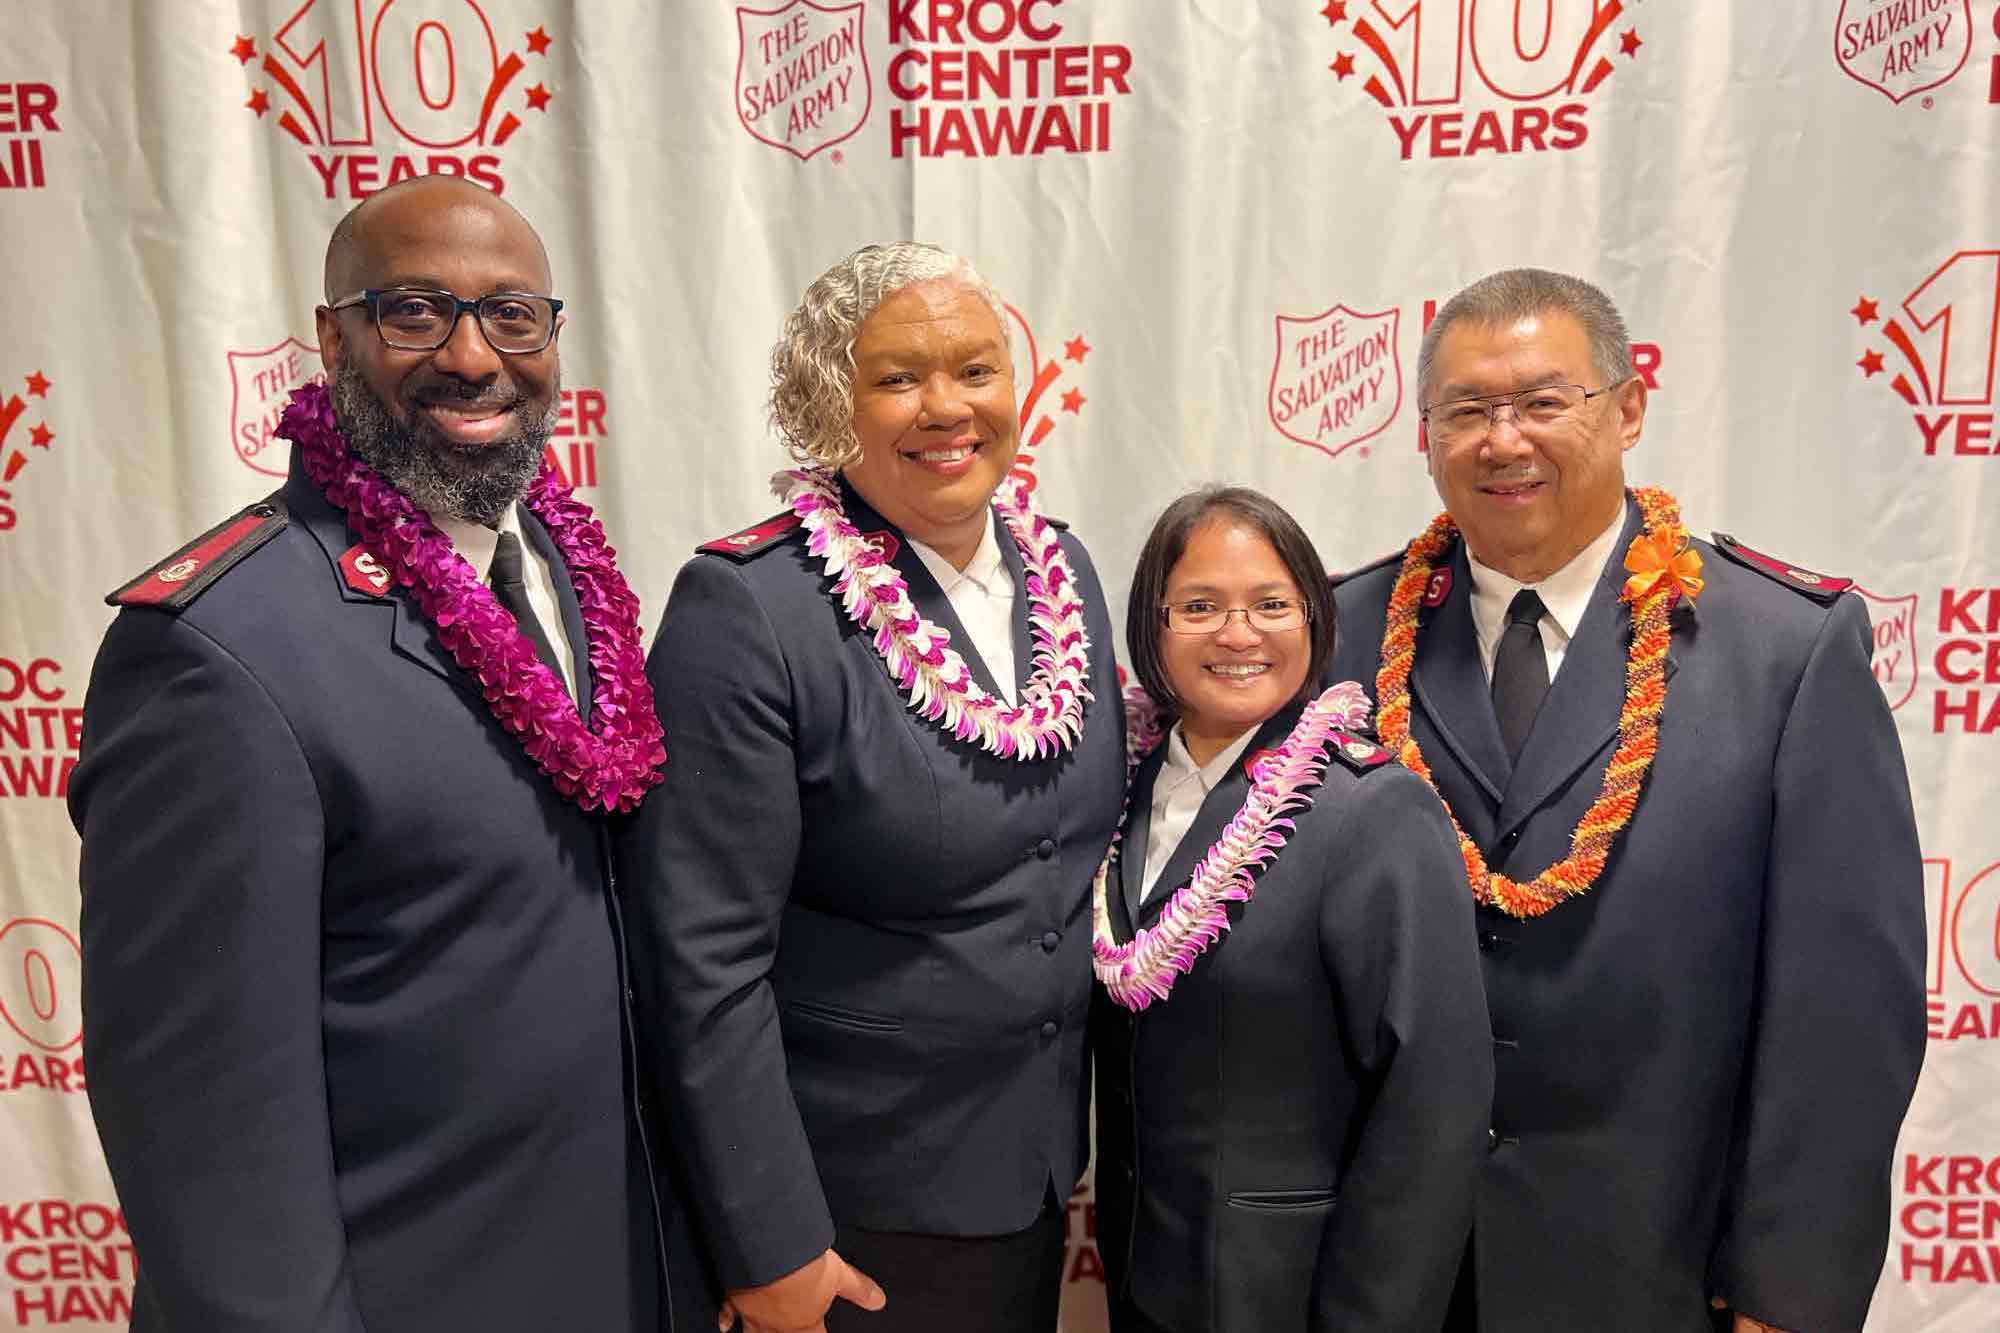 Kroc Center Hawaii celebrates 10 years of being a ‘beacon of hope’ in Kapolei